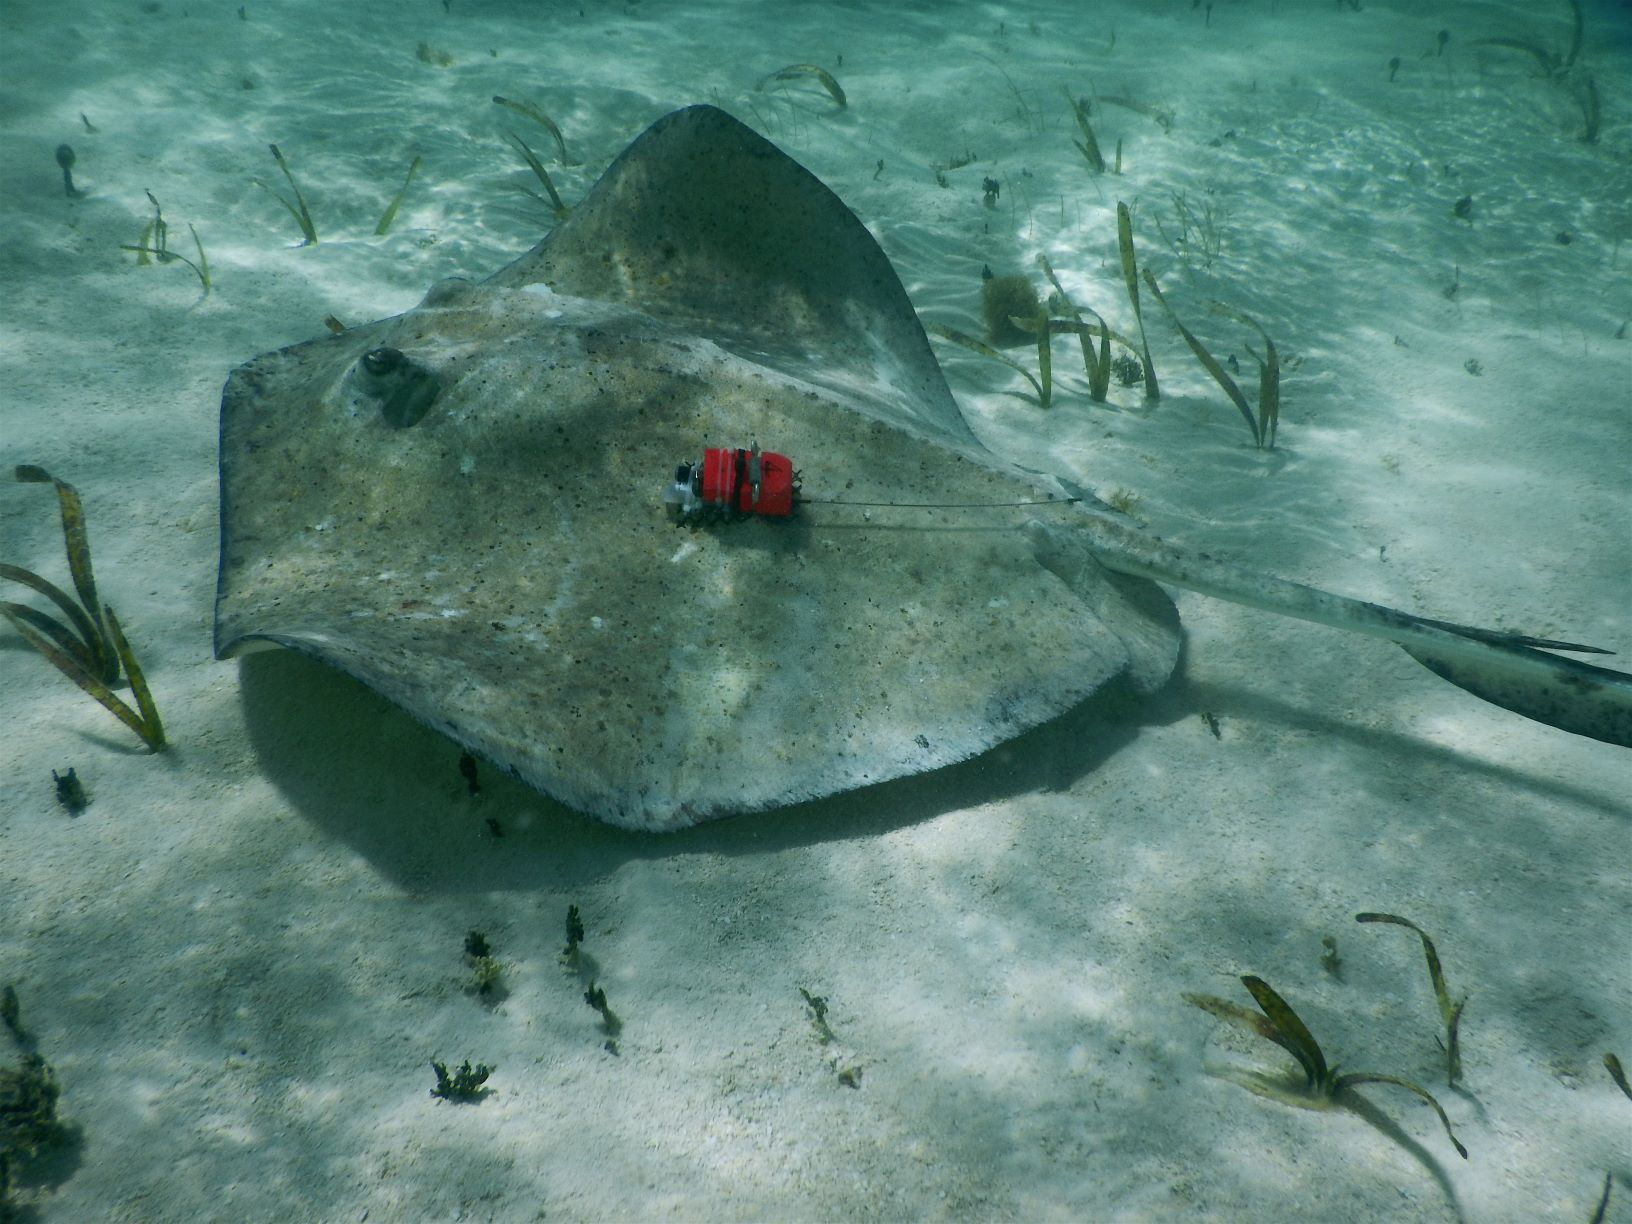 Southern stingray with accelerometer